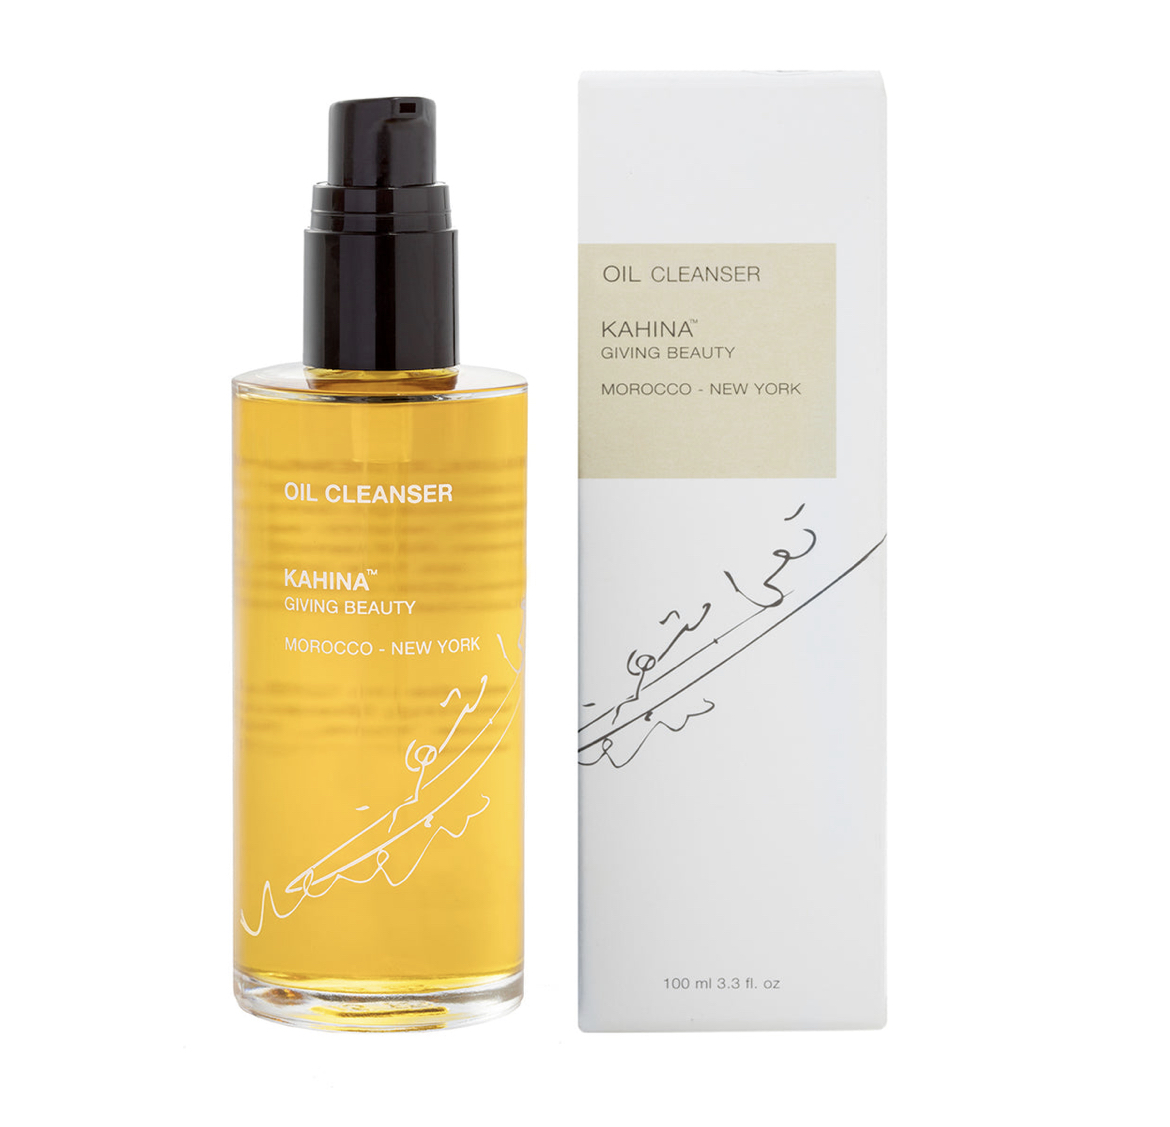 Kahina giving beauty oil cleanser